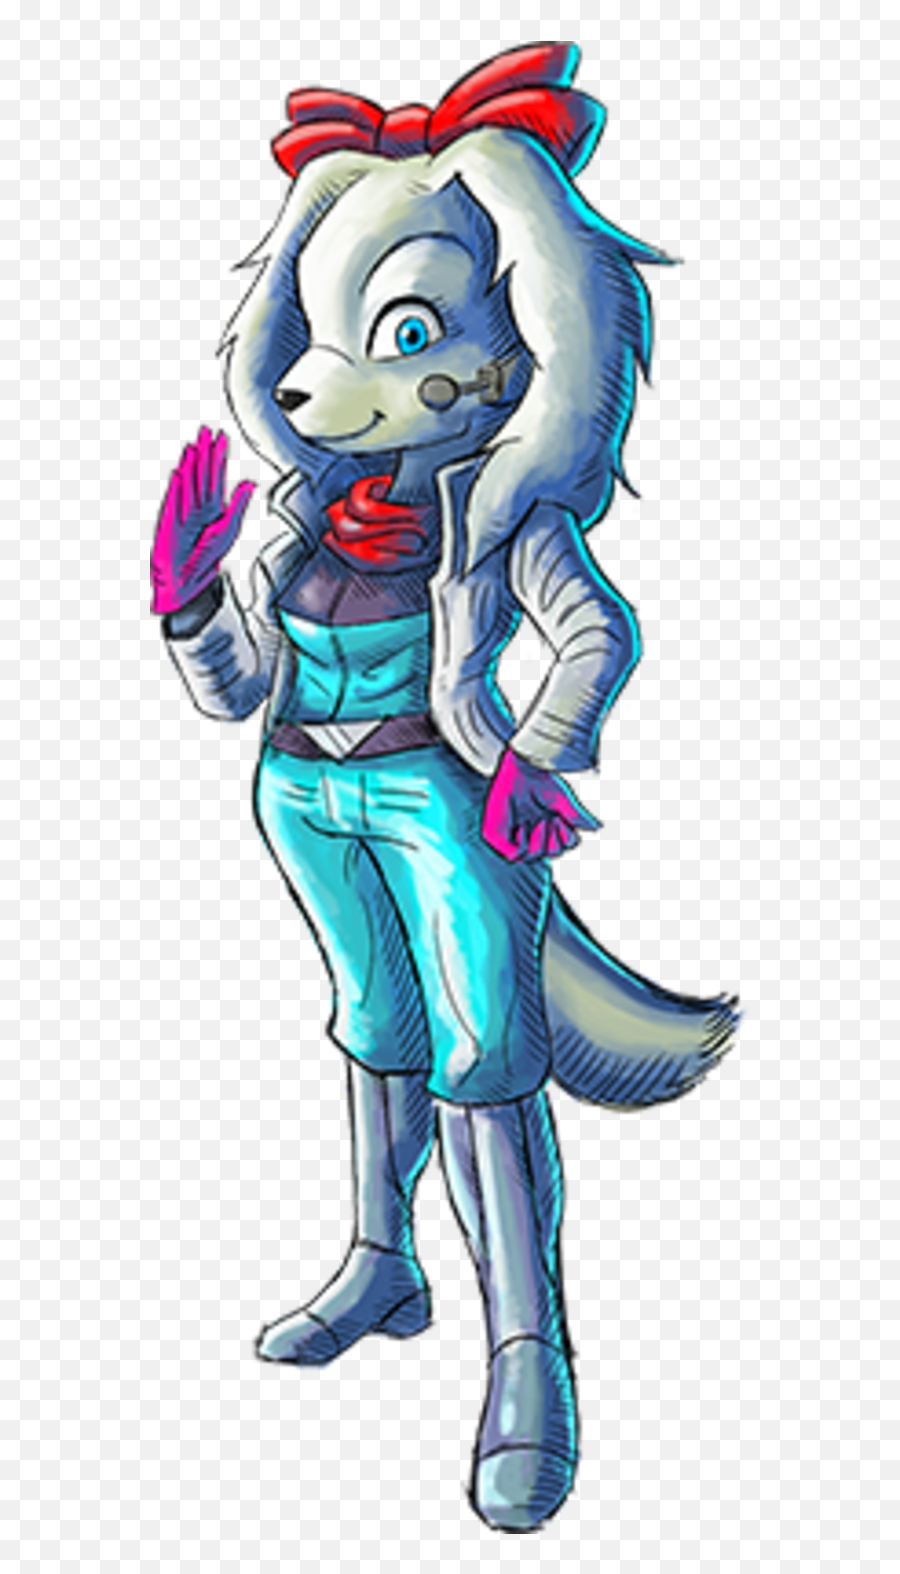 Official Character Art Of Fay For Star Fox 2 - Star Fox 2 Characters Png,Star Fox Logo Png